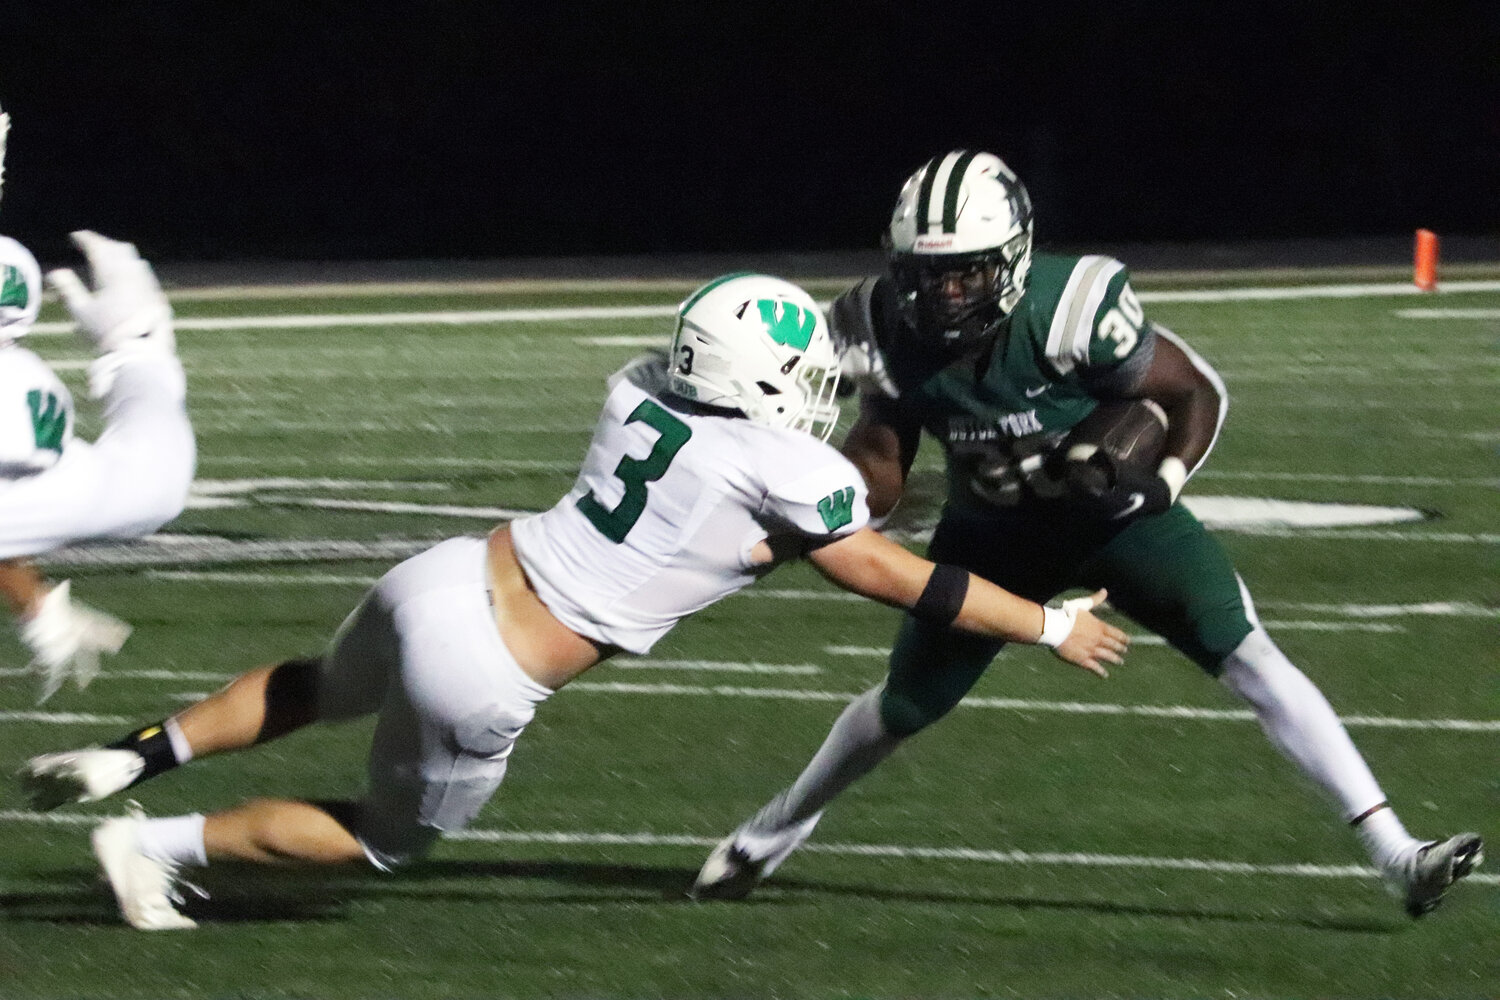 Dutch Fork running back Maurice Anderson breaks a tackle during the team's 17-14 loss to Weddington (NC).